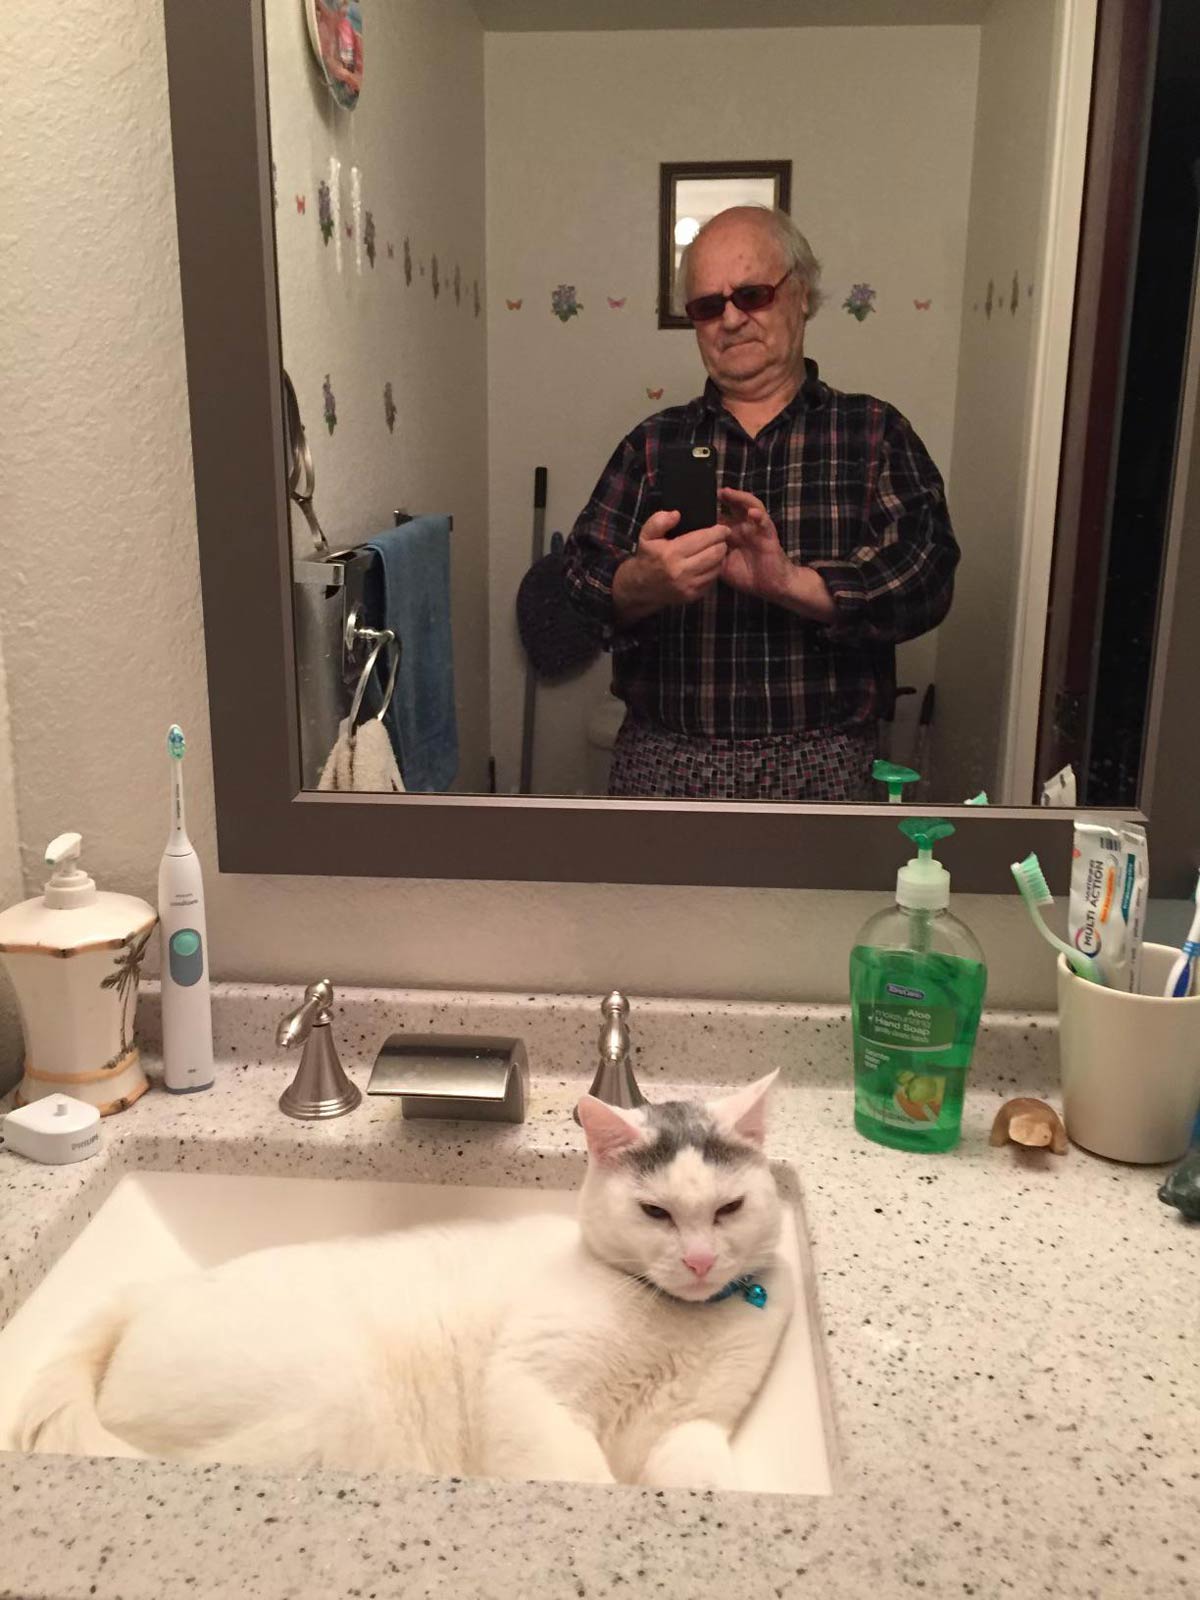 This photo on my grandpa’s phone vibing with the cat